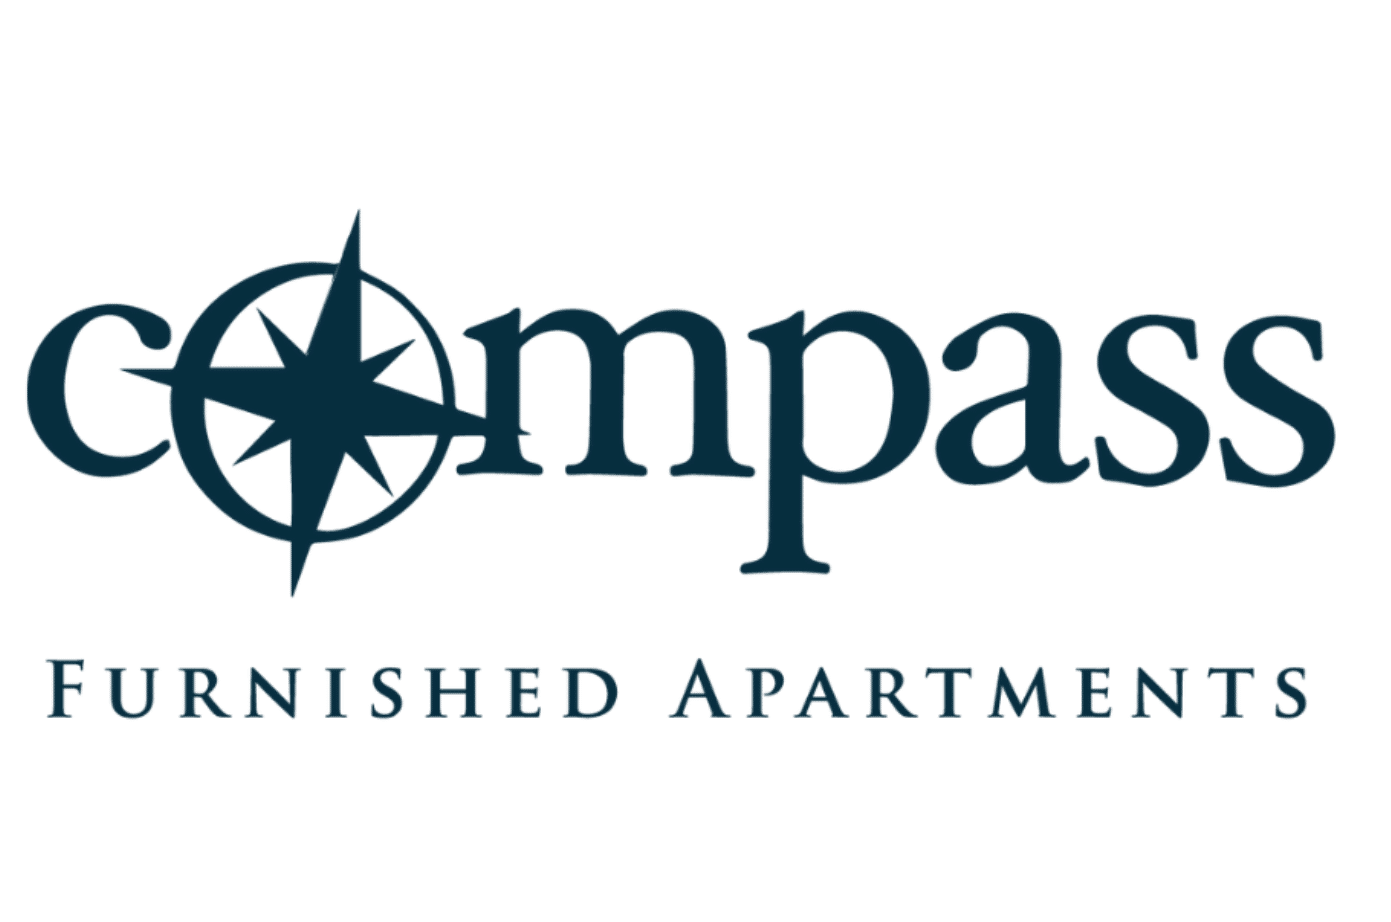 Compass Furnished Apartments Receives SB100 Award, Recognizing Top 100 Small to Mid-Sized Businesses in the US